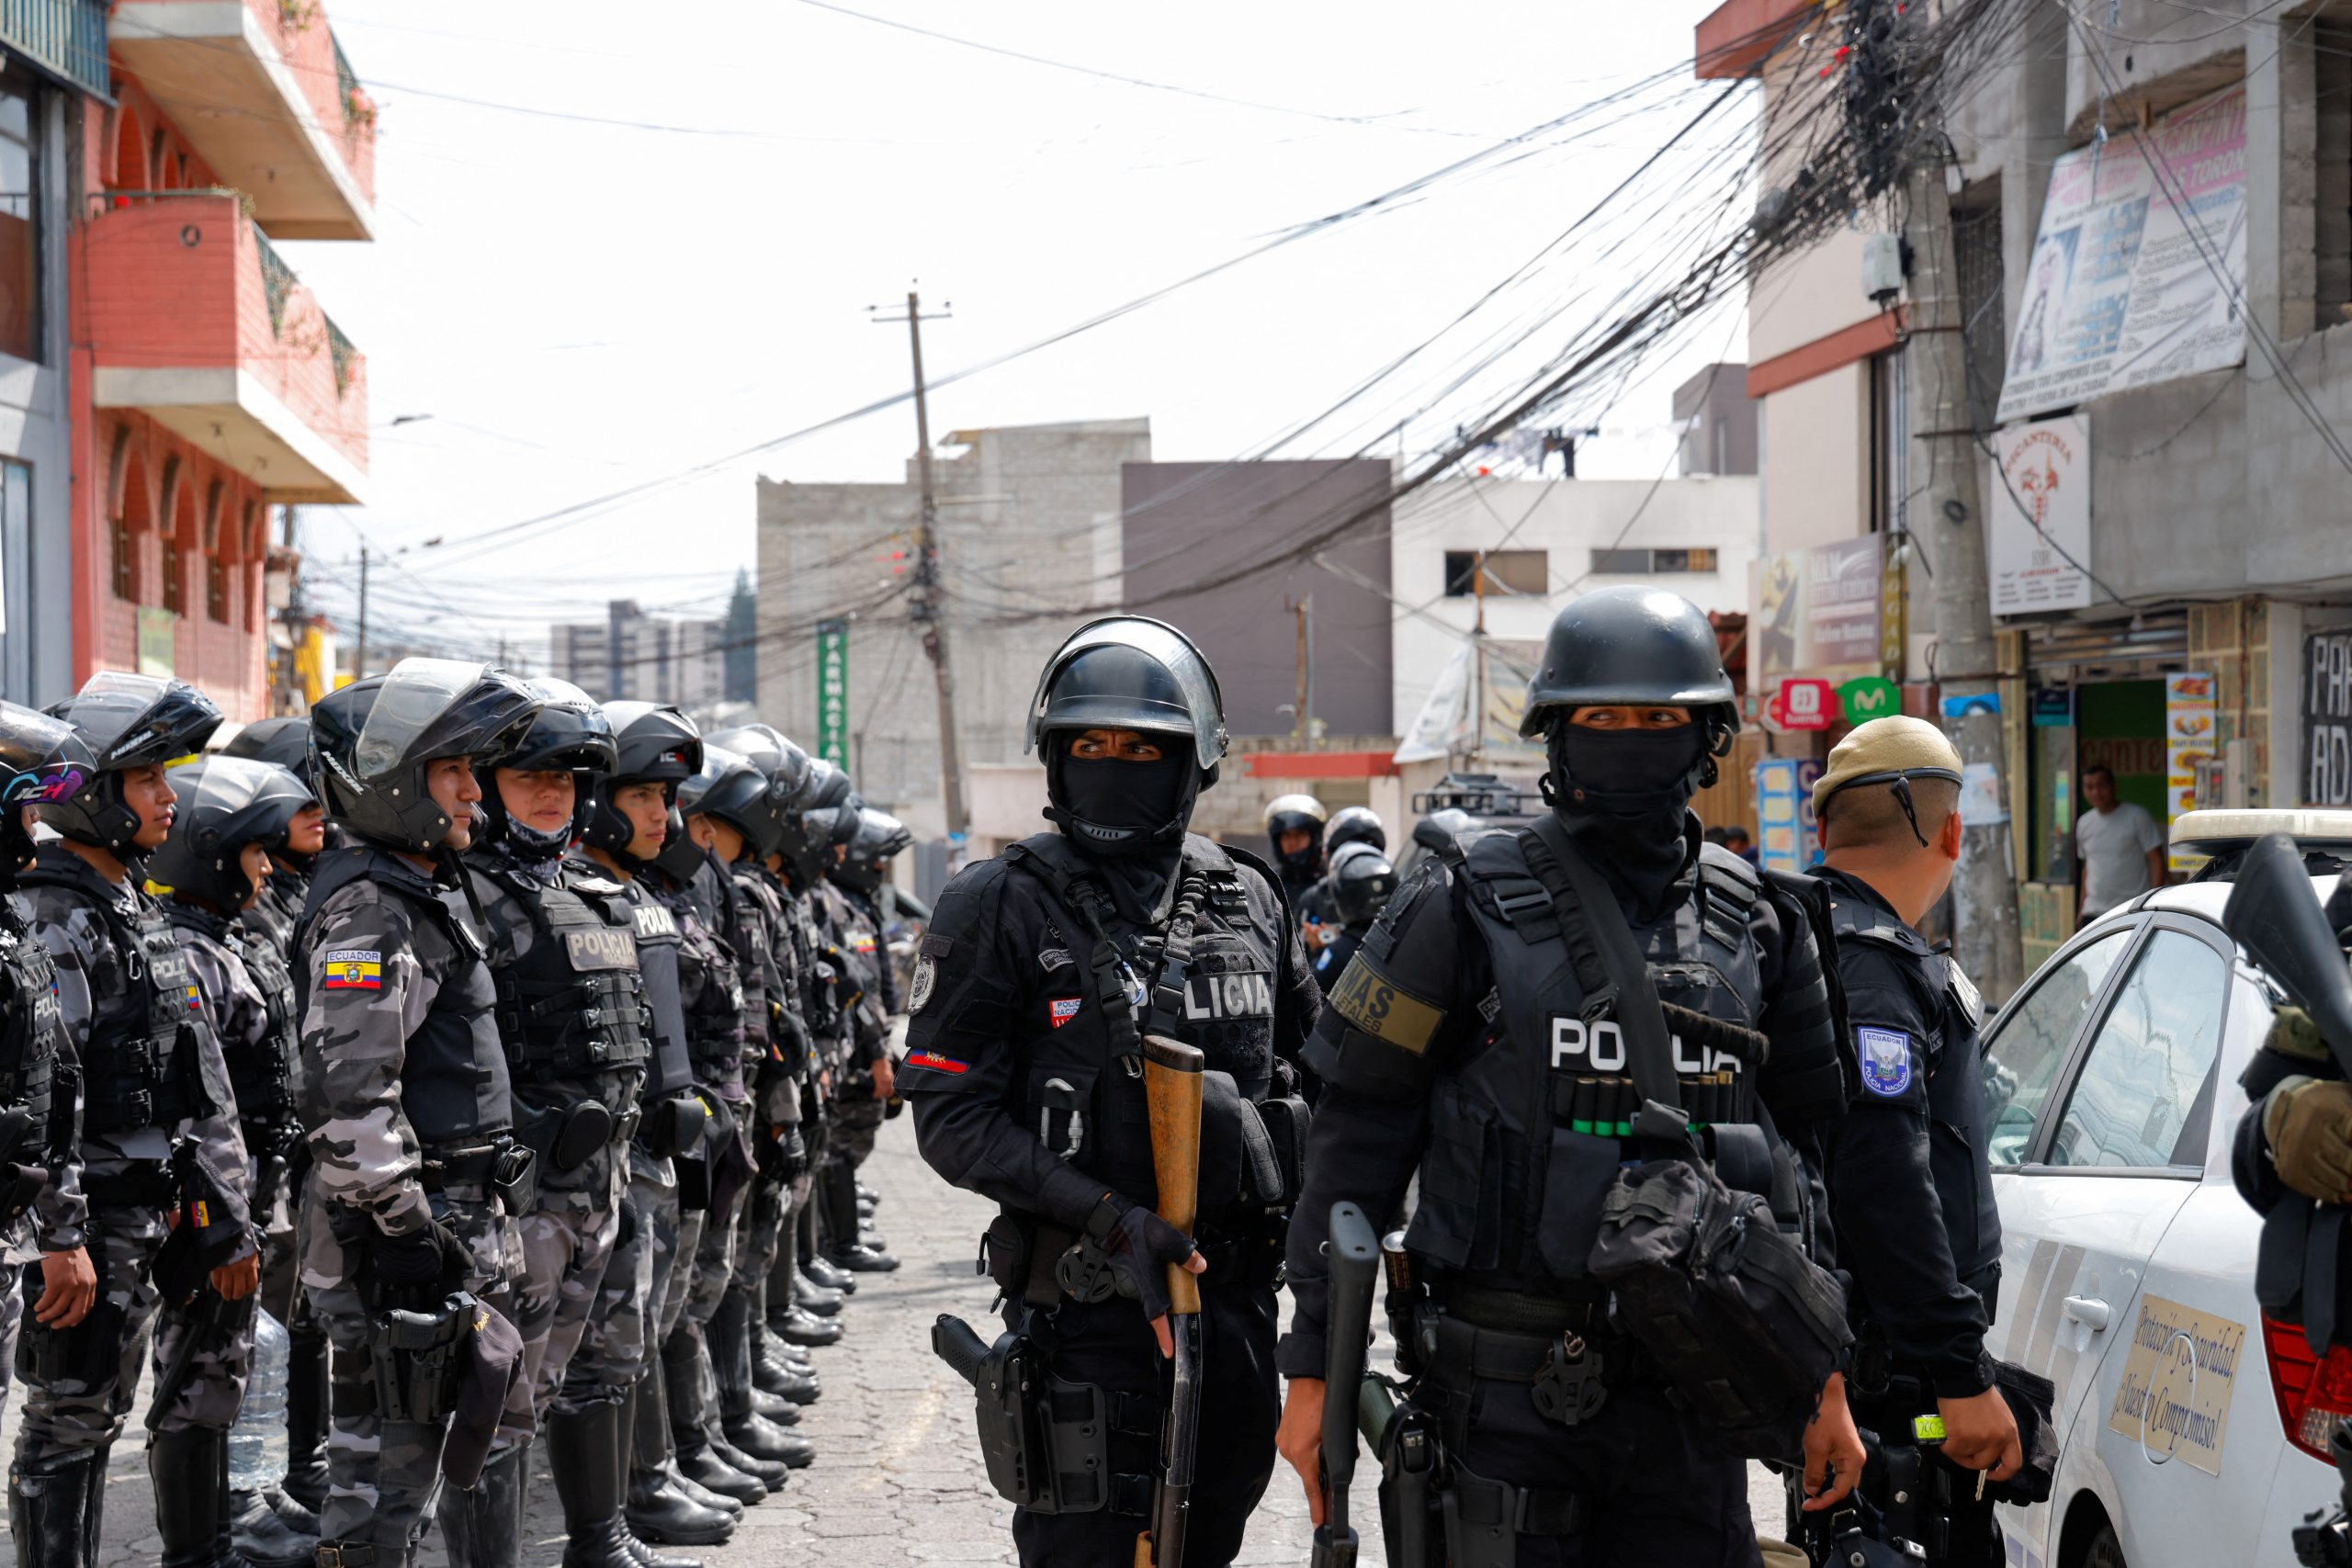 Ecuador - unrest and war by organised crime groups against the state